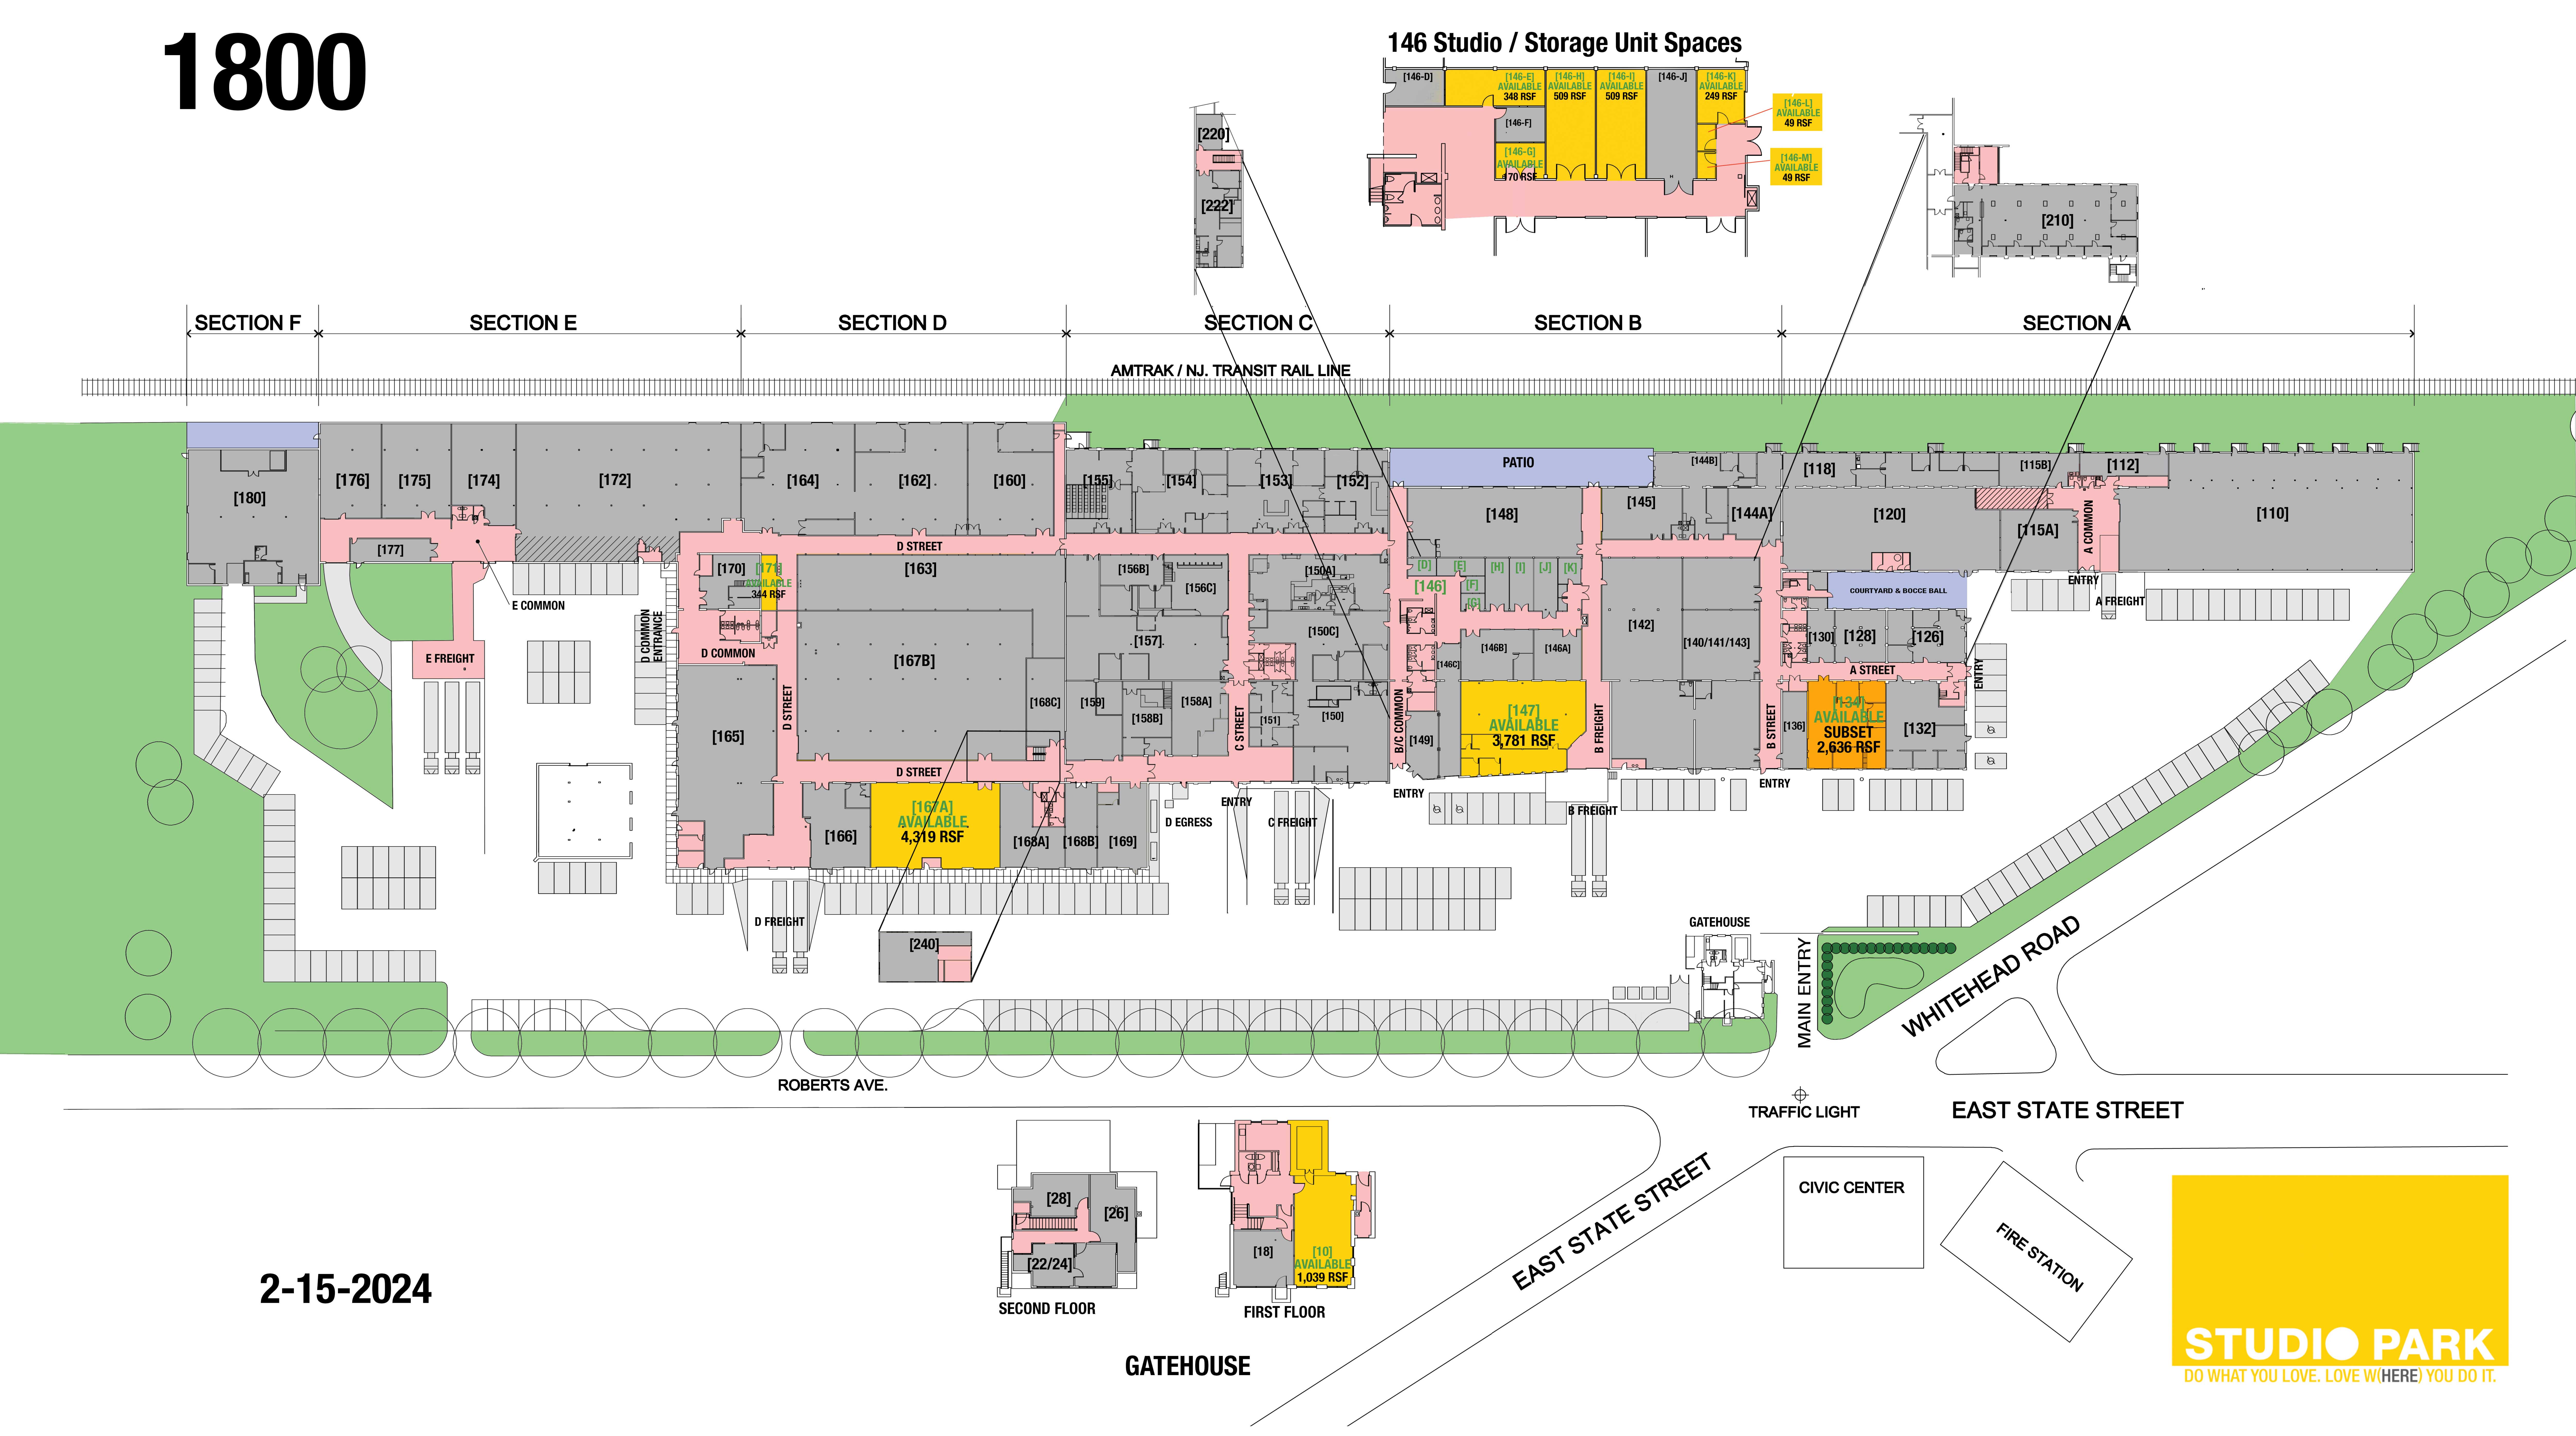 Center Layout View